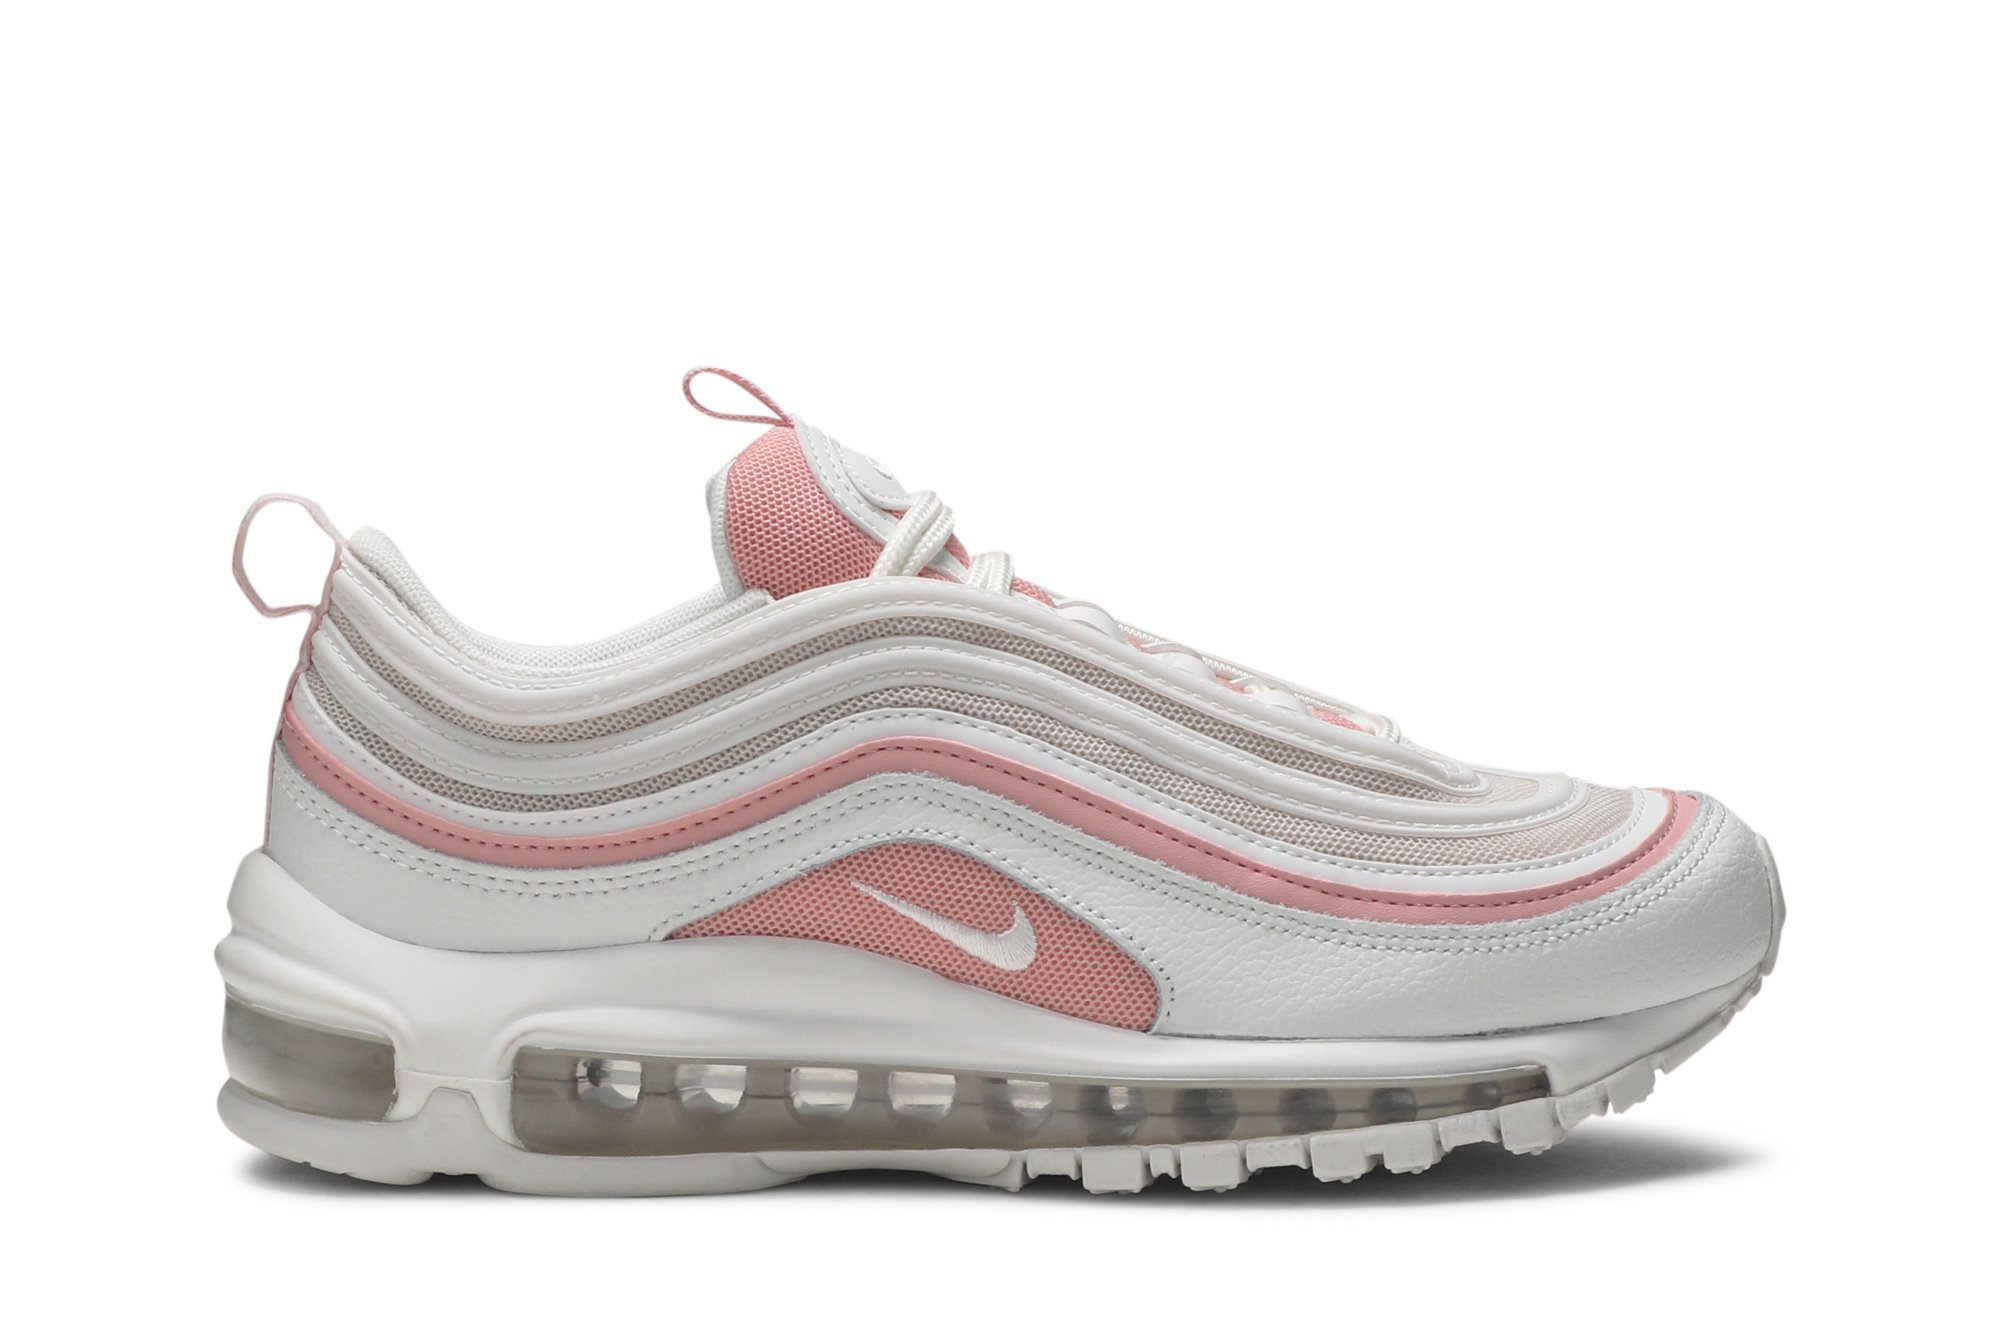 Buy Wmns Air Max 97 'Bleached Coral' - 921733 104 | GOAT